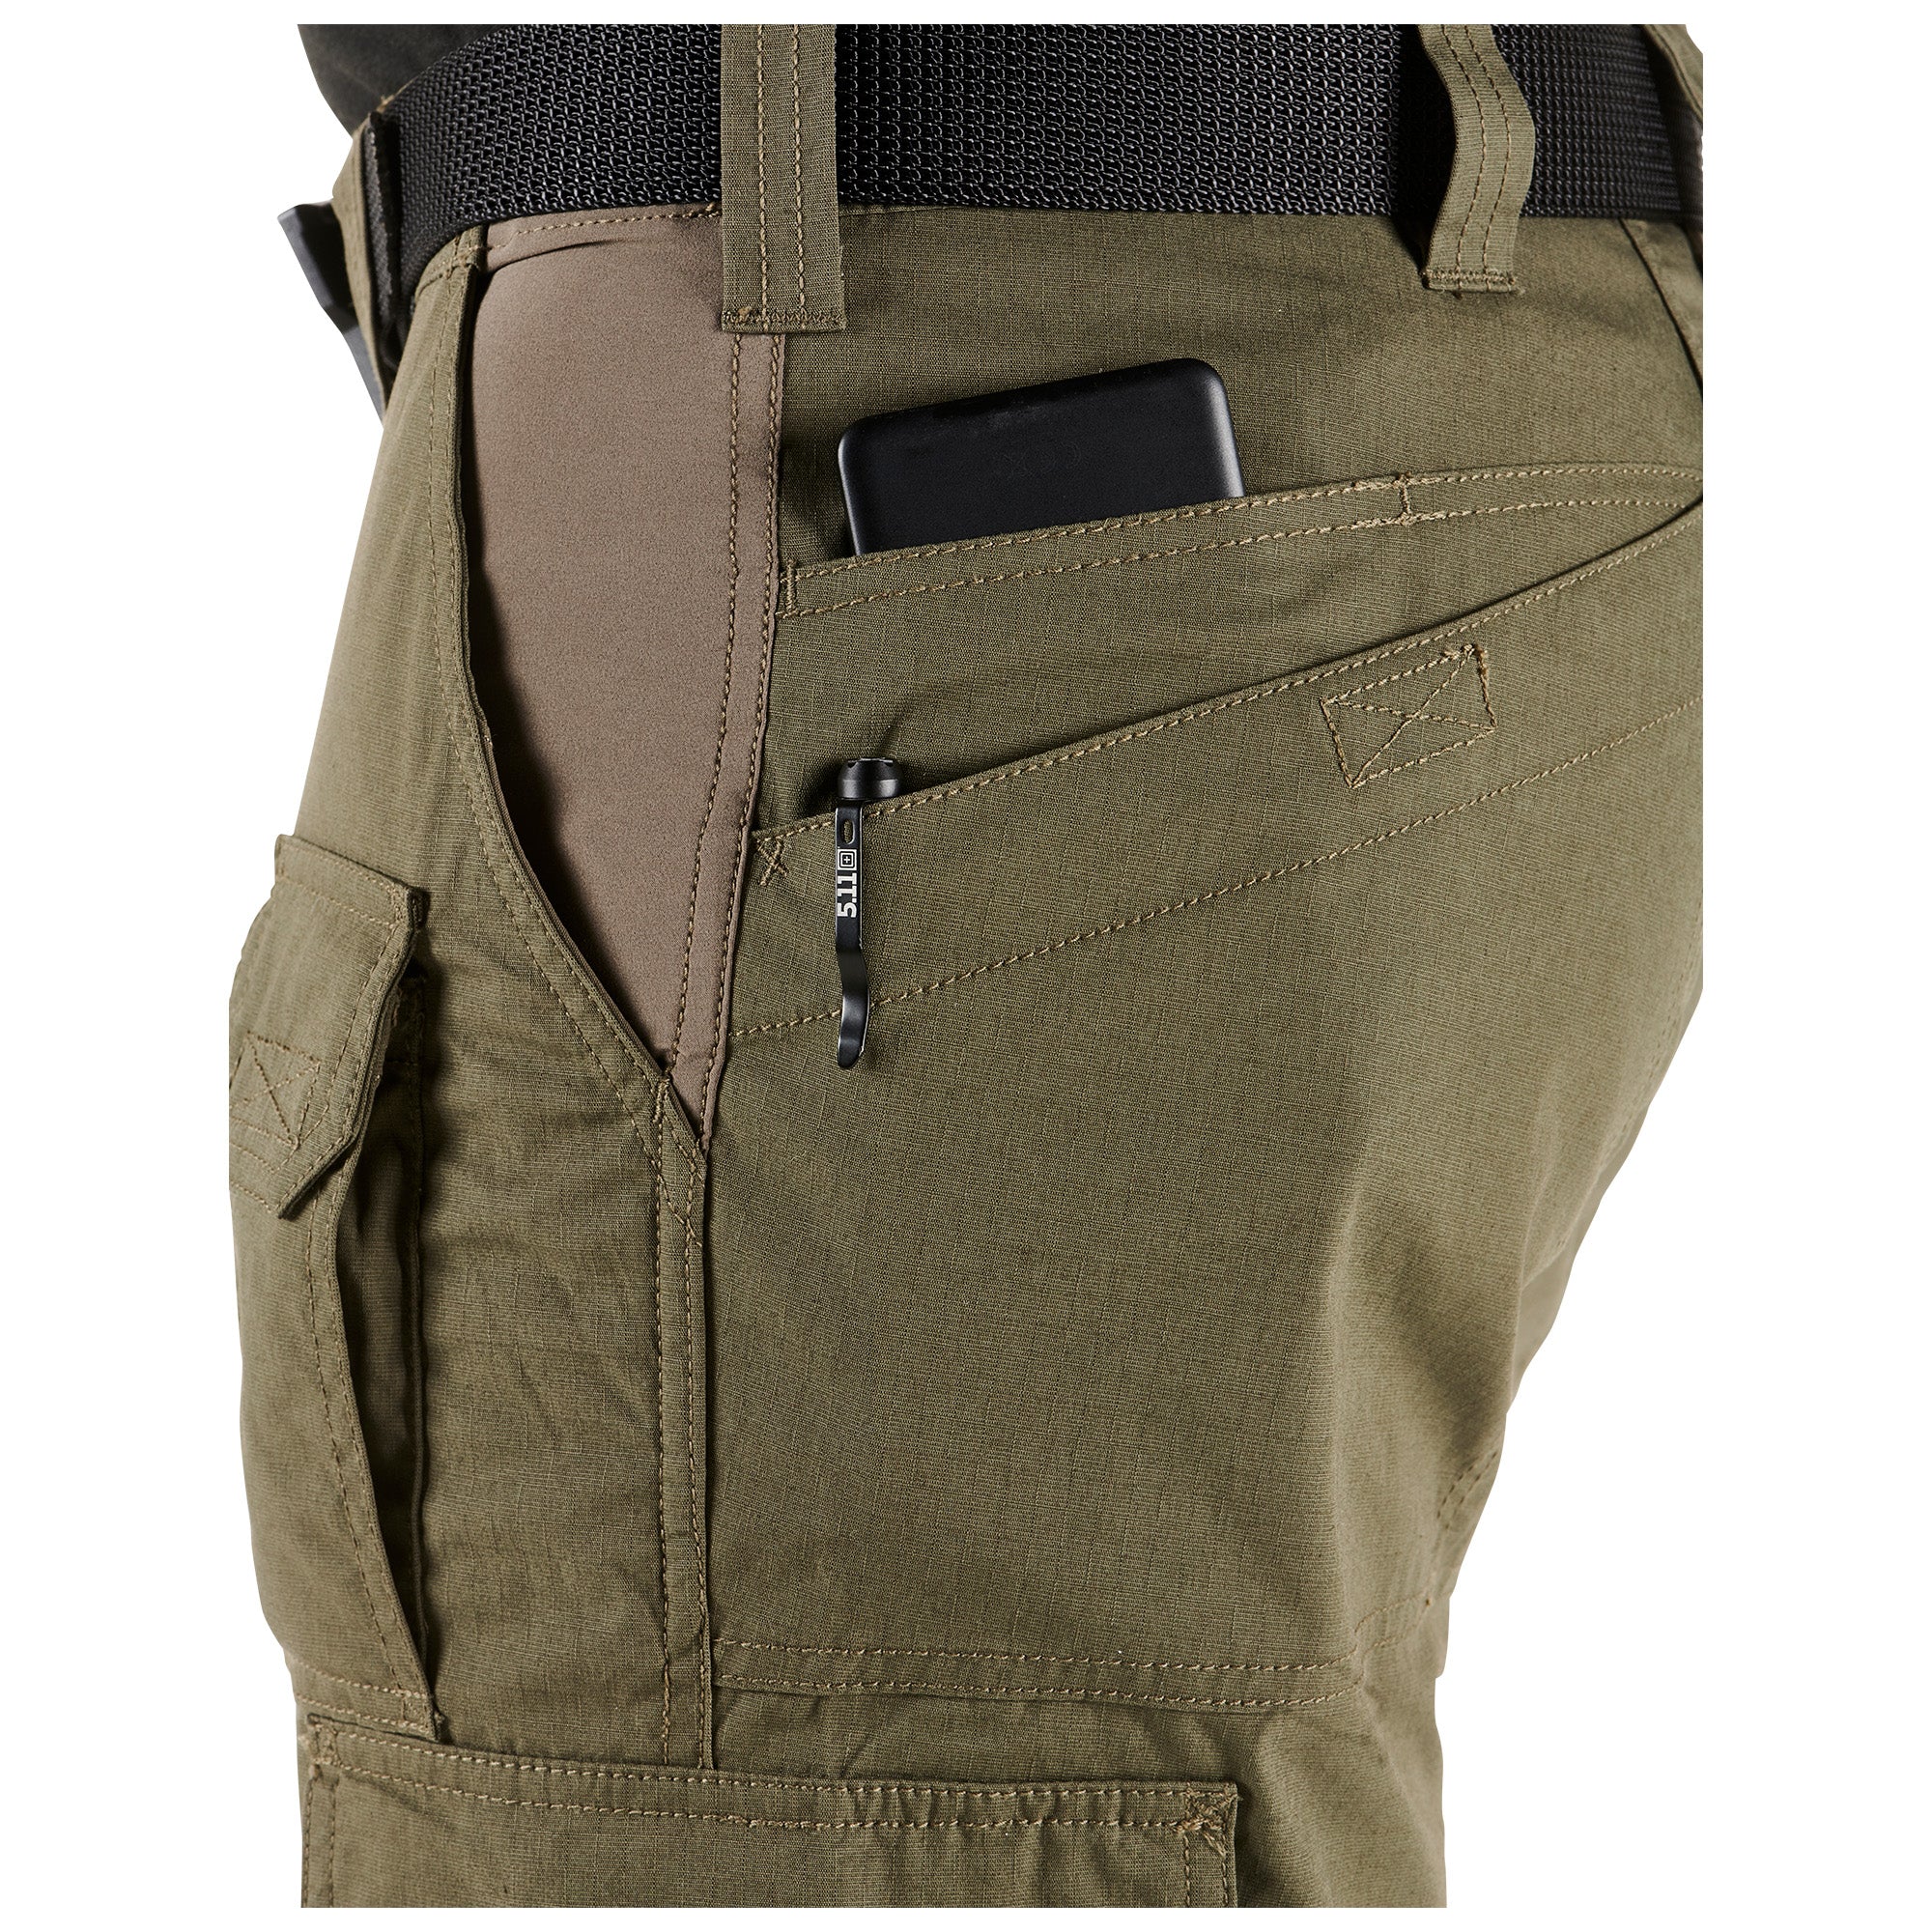 5.11 Tactical - Ranger Green is the new black. Break away from